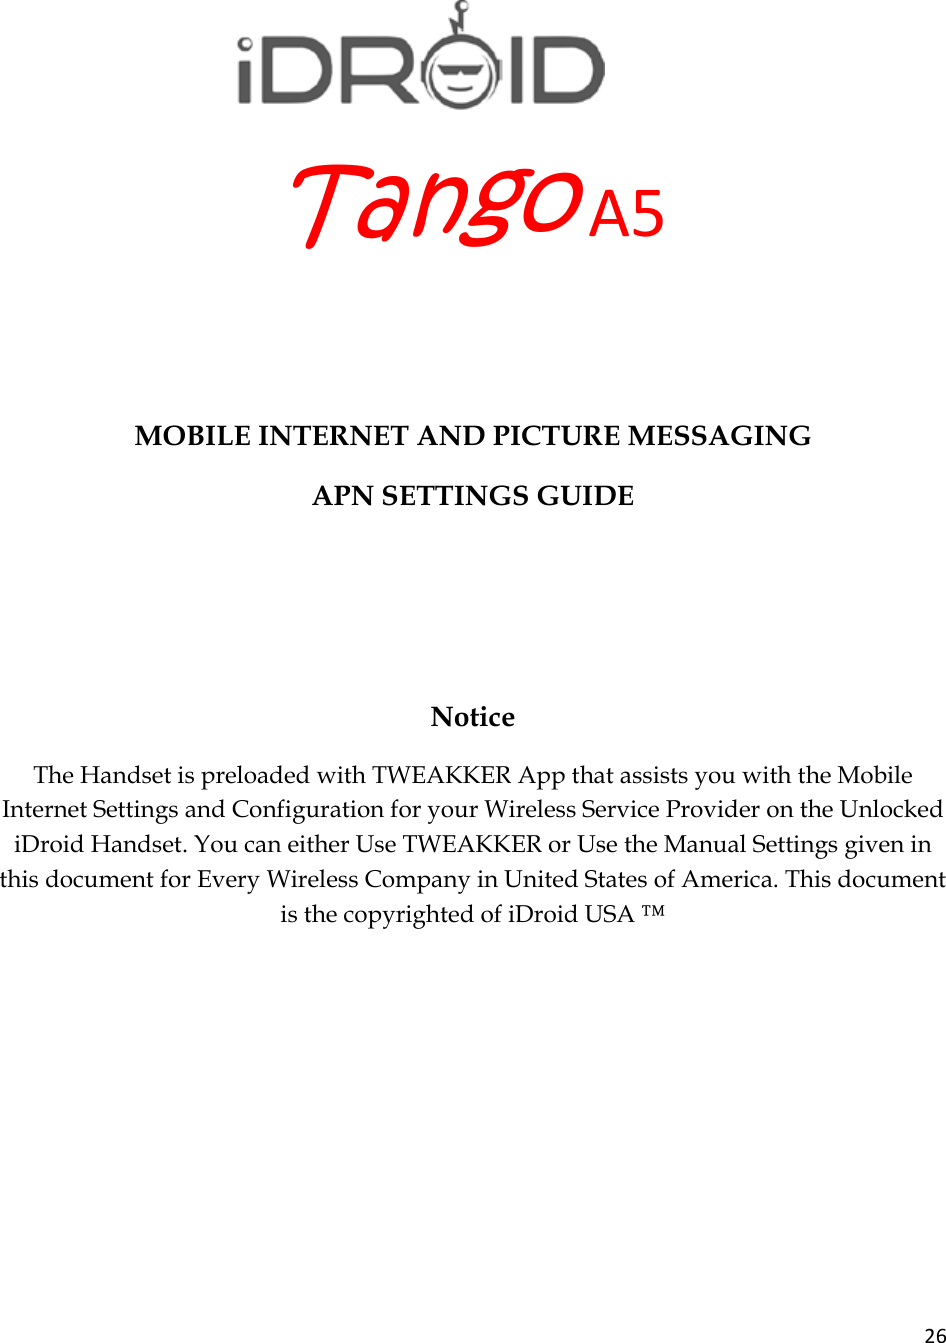 26TangoA5  MOBILE INTERNET AND PICTURE MESSAGING APN SETTINGS GUIDE    Notice The Handset is preloaded with TWEAKKER App that assists you with the Mobile Internet Settings and Configuration for your Wireless Service Provider on the Unlocked iDroid Handset. You can either Use TWEAKKER or Use the Manual Settings given in this document for Every Wireless Company in United States of America. This document is the copyrighted of iDroid USA ™       